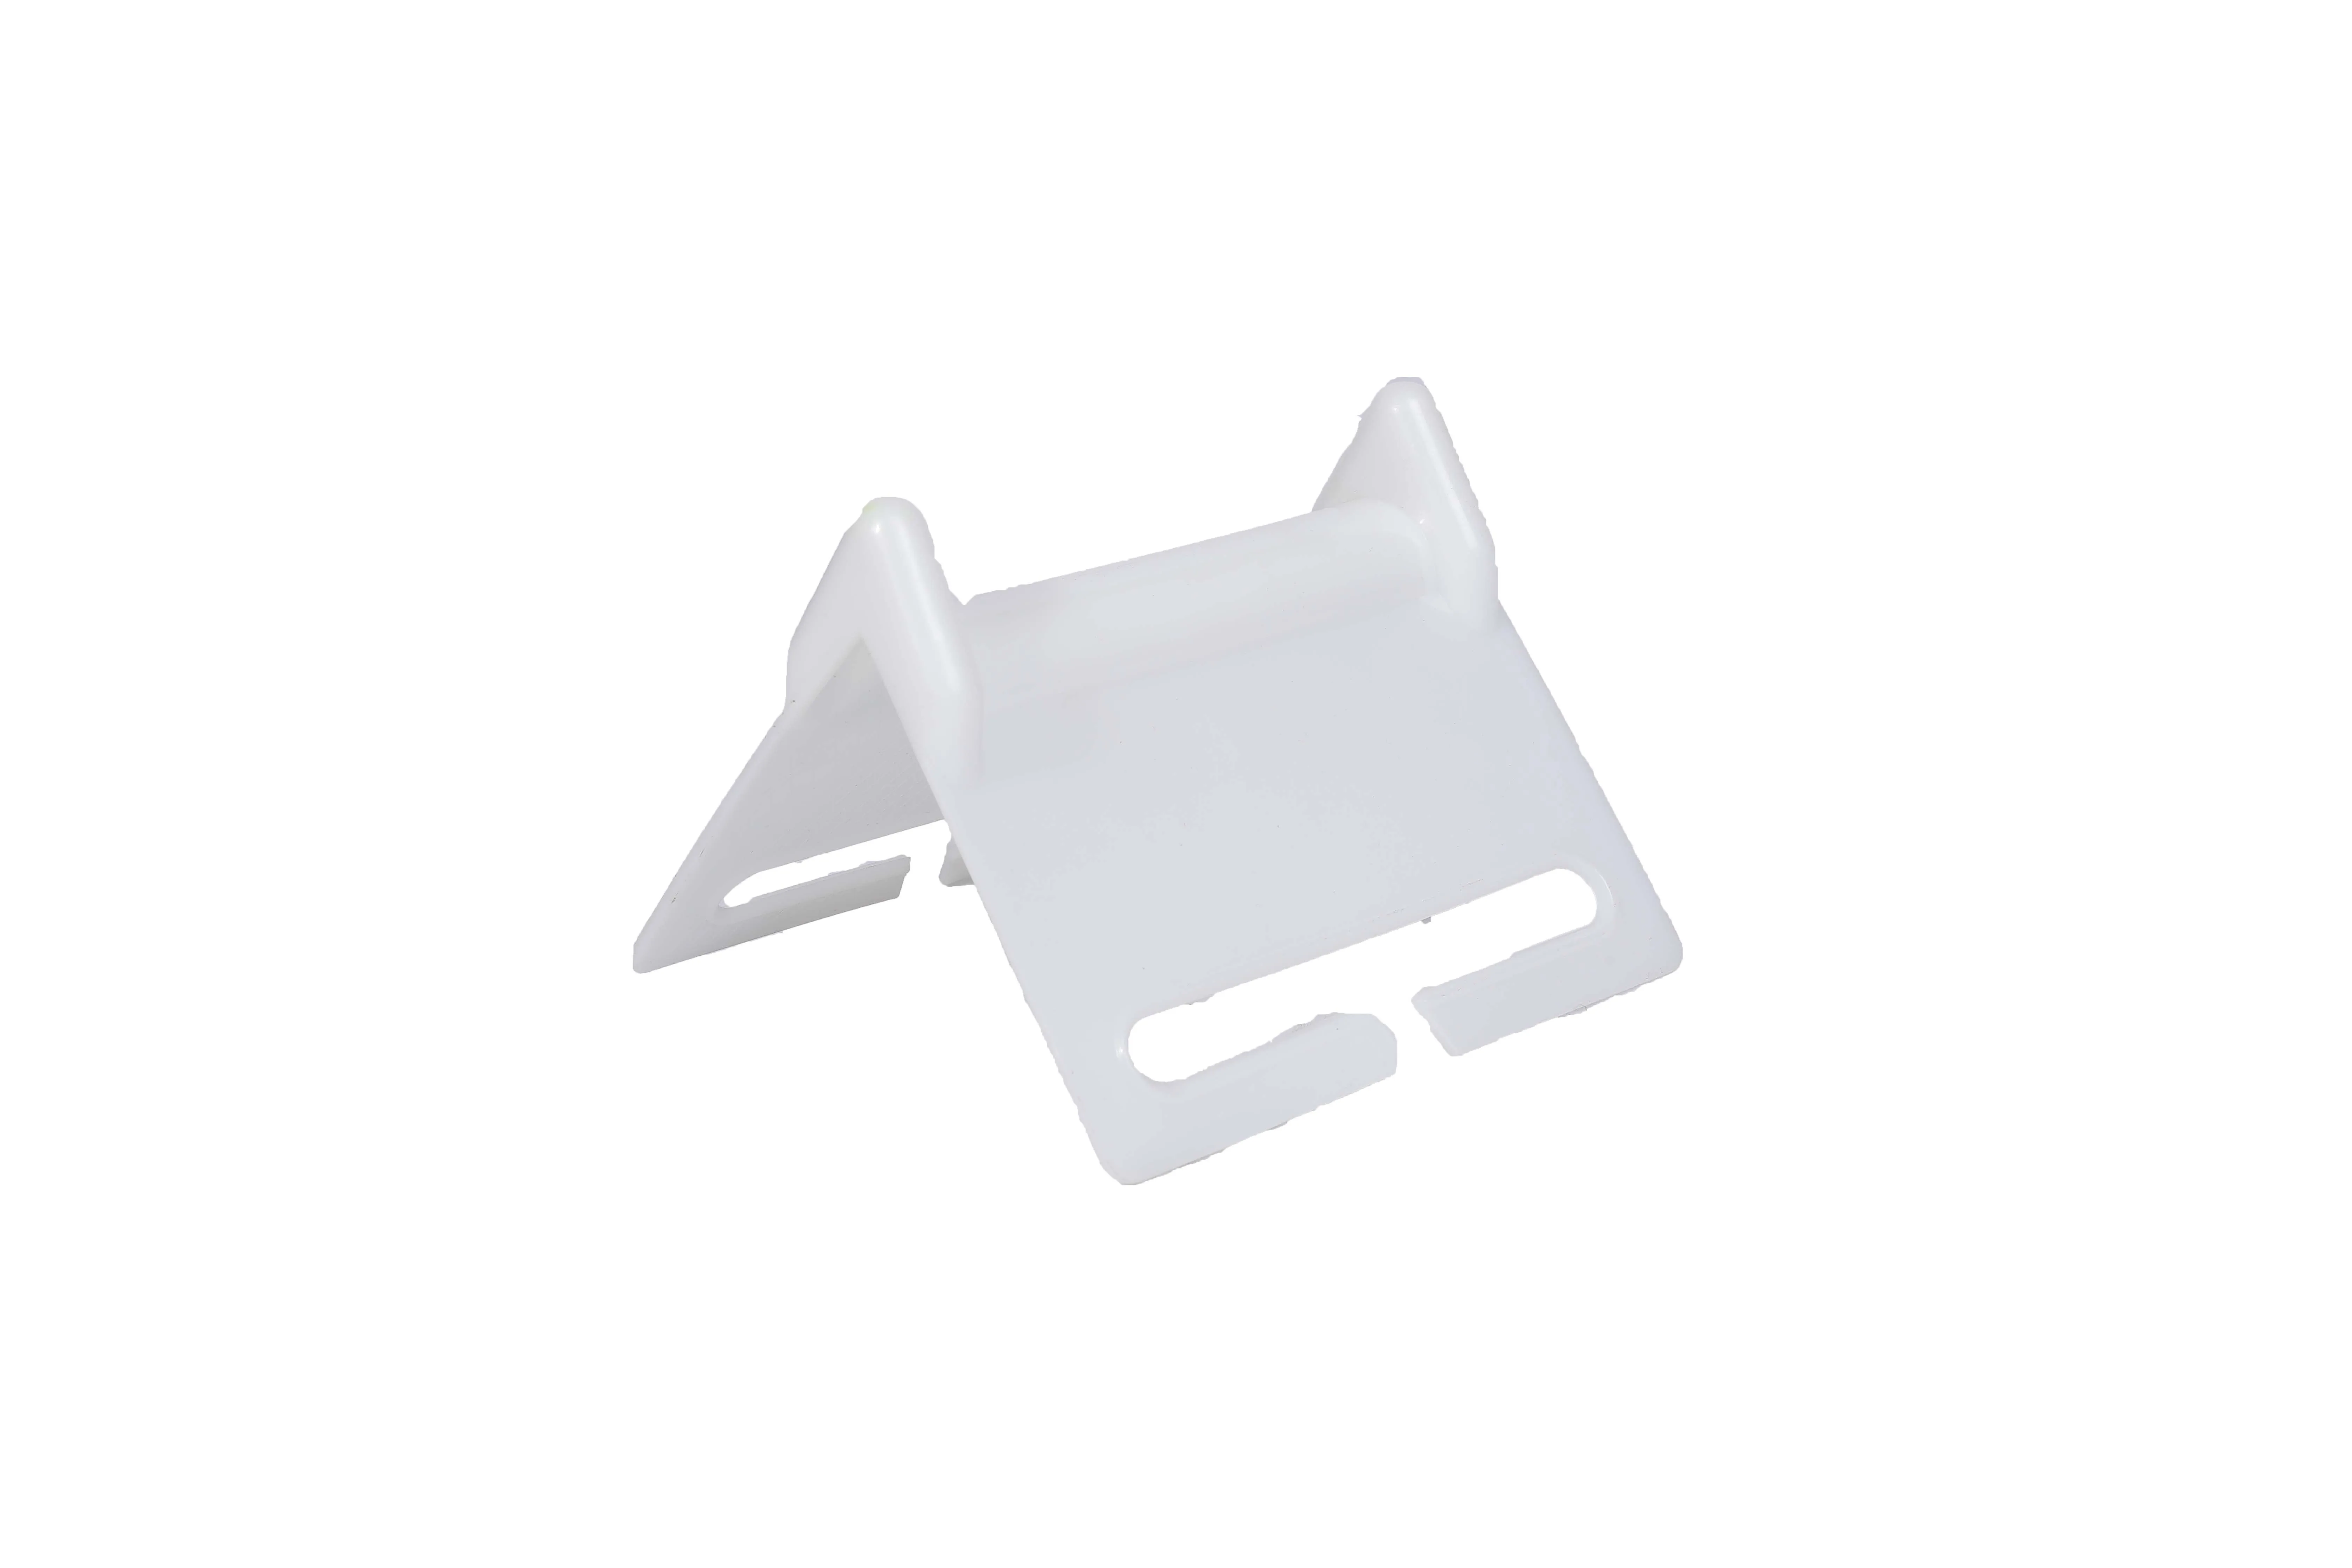 4 Inch Plastic Sharp Box Corner Protectors With Six Holes for Ratchet Tie Down